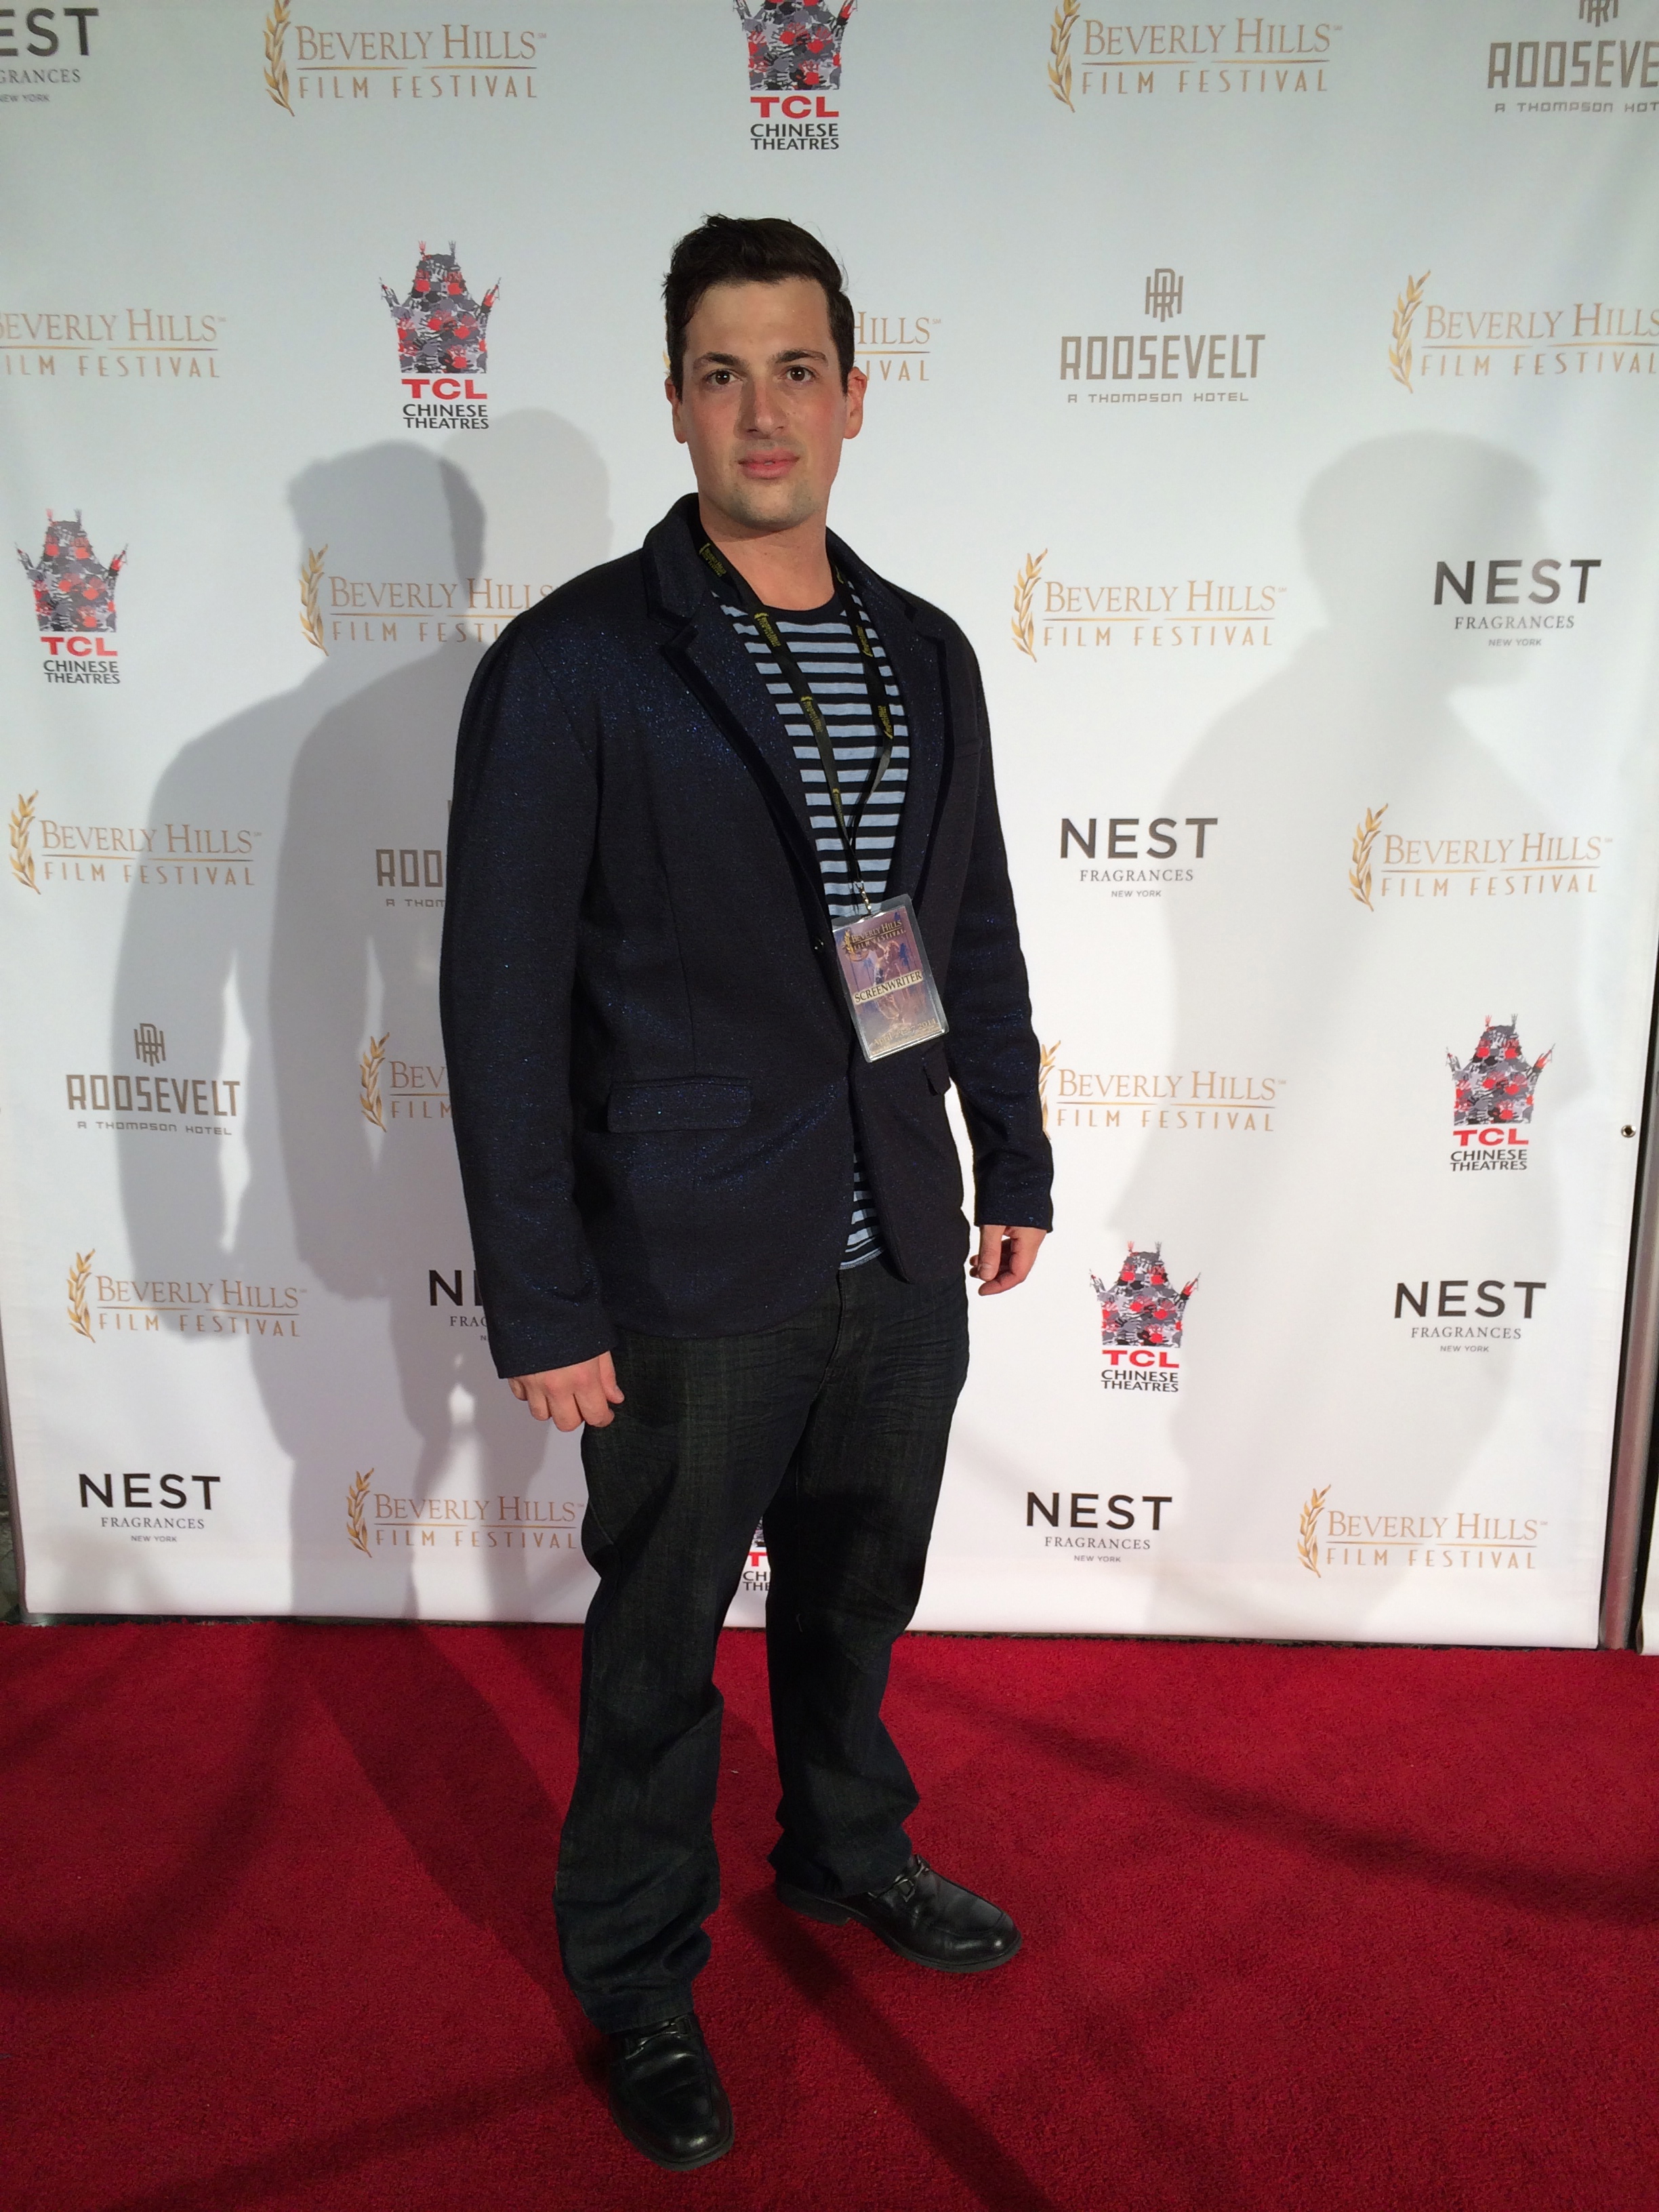 Red carpet at the 2014 Beverly Hills Film Festival for selection for 